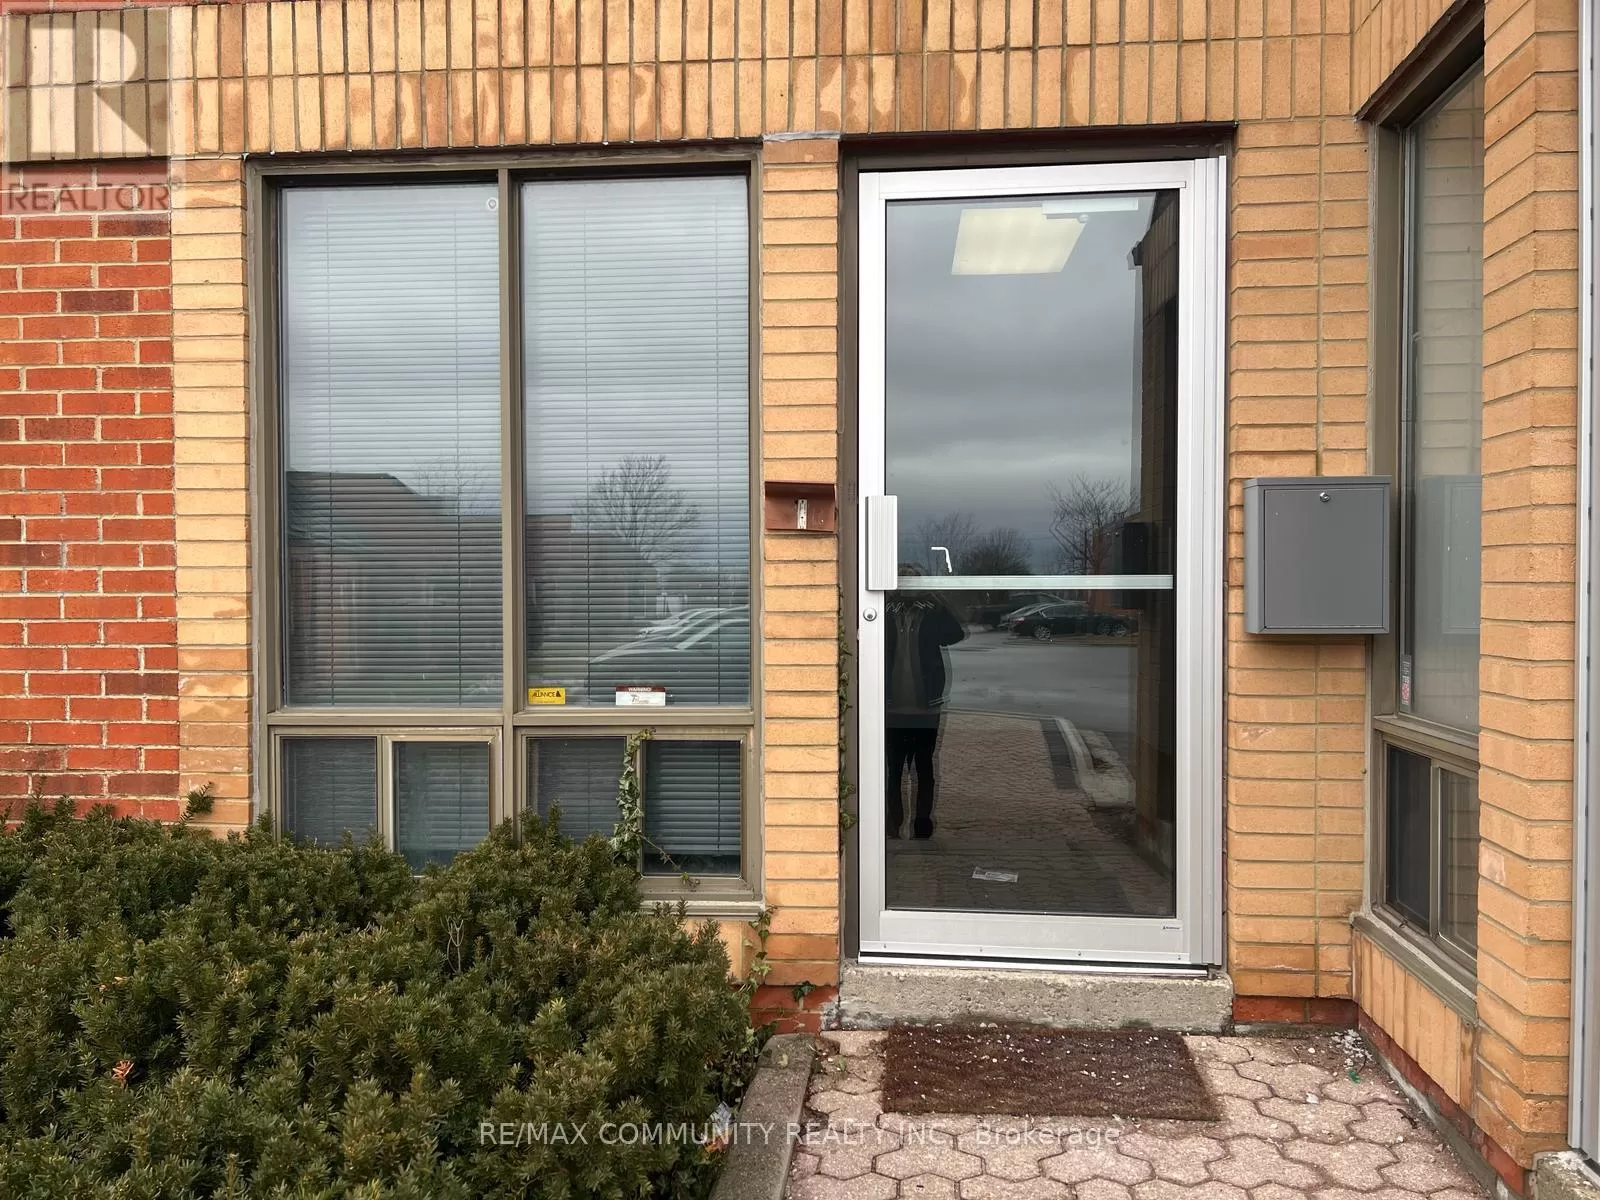 Retail for rent: 37 - 1200 Aerowood Drive, Mississauga, Ontario L4W 2S7